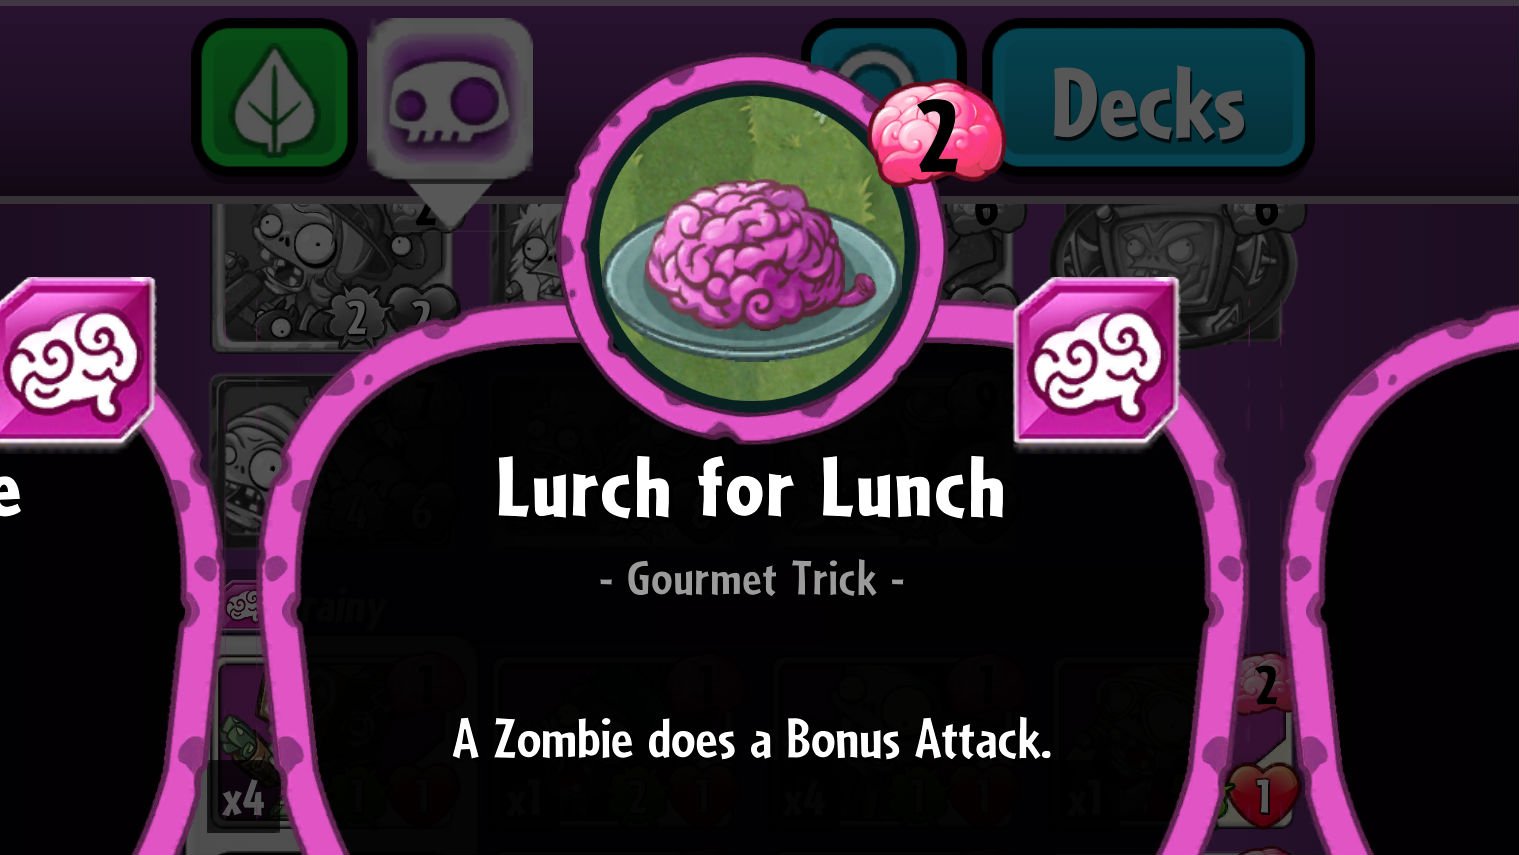 Plants vs. Zombies Heroes Lurch for Lunch